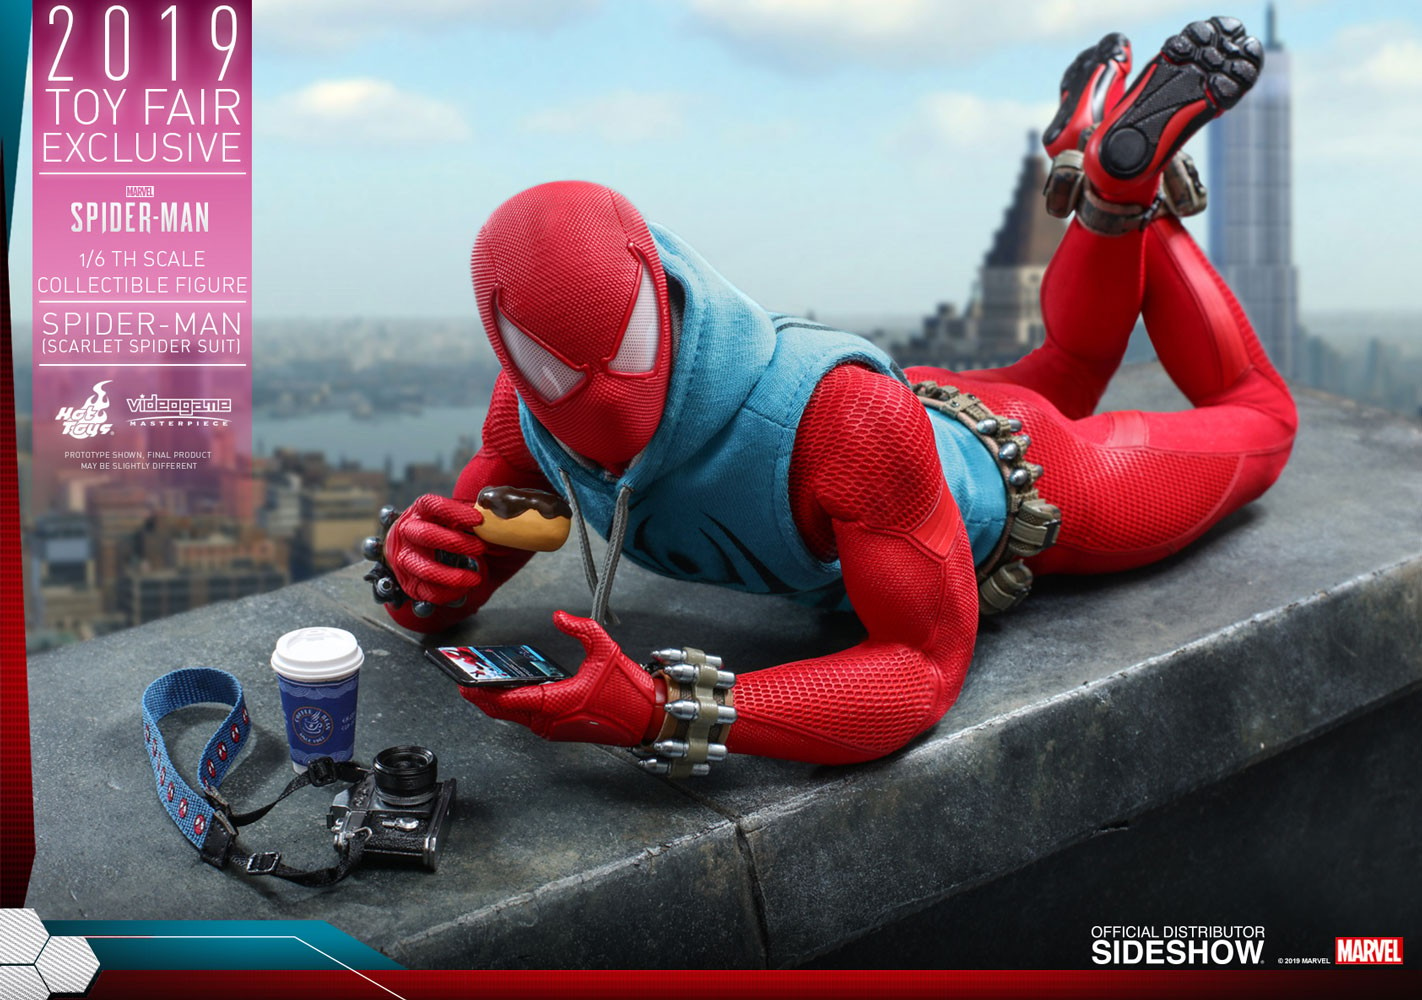 Spider-Man (Scarlet Spider Suit) Exclusive Edition (Prototype Shown) View 1